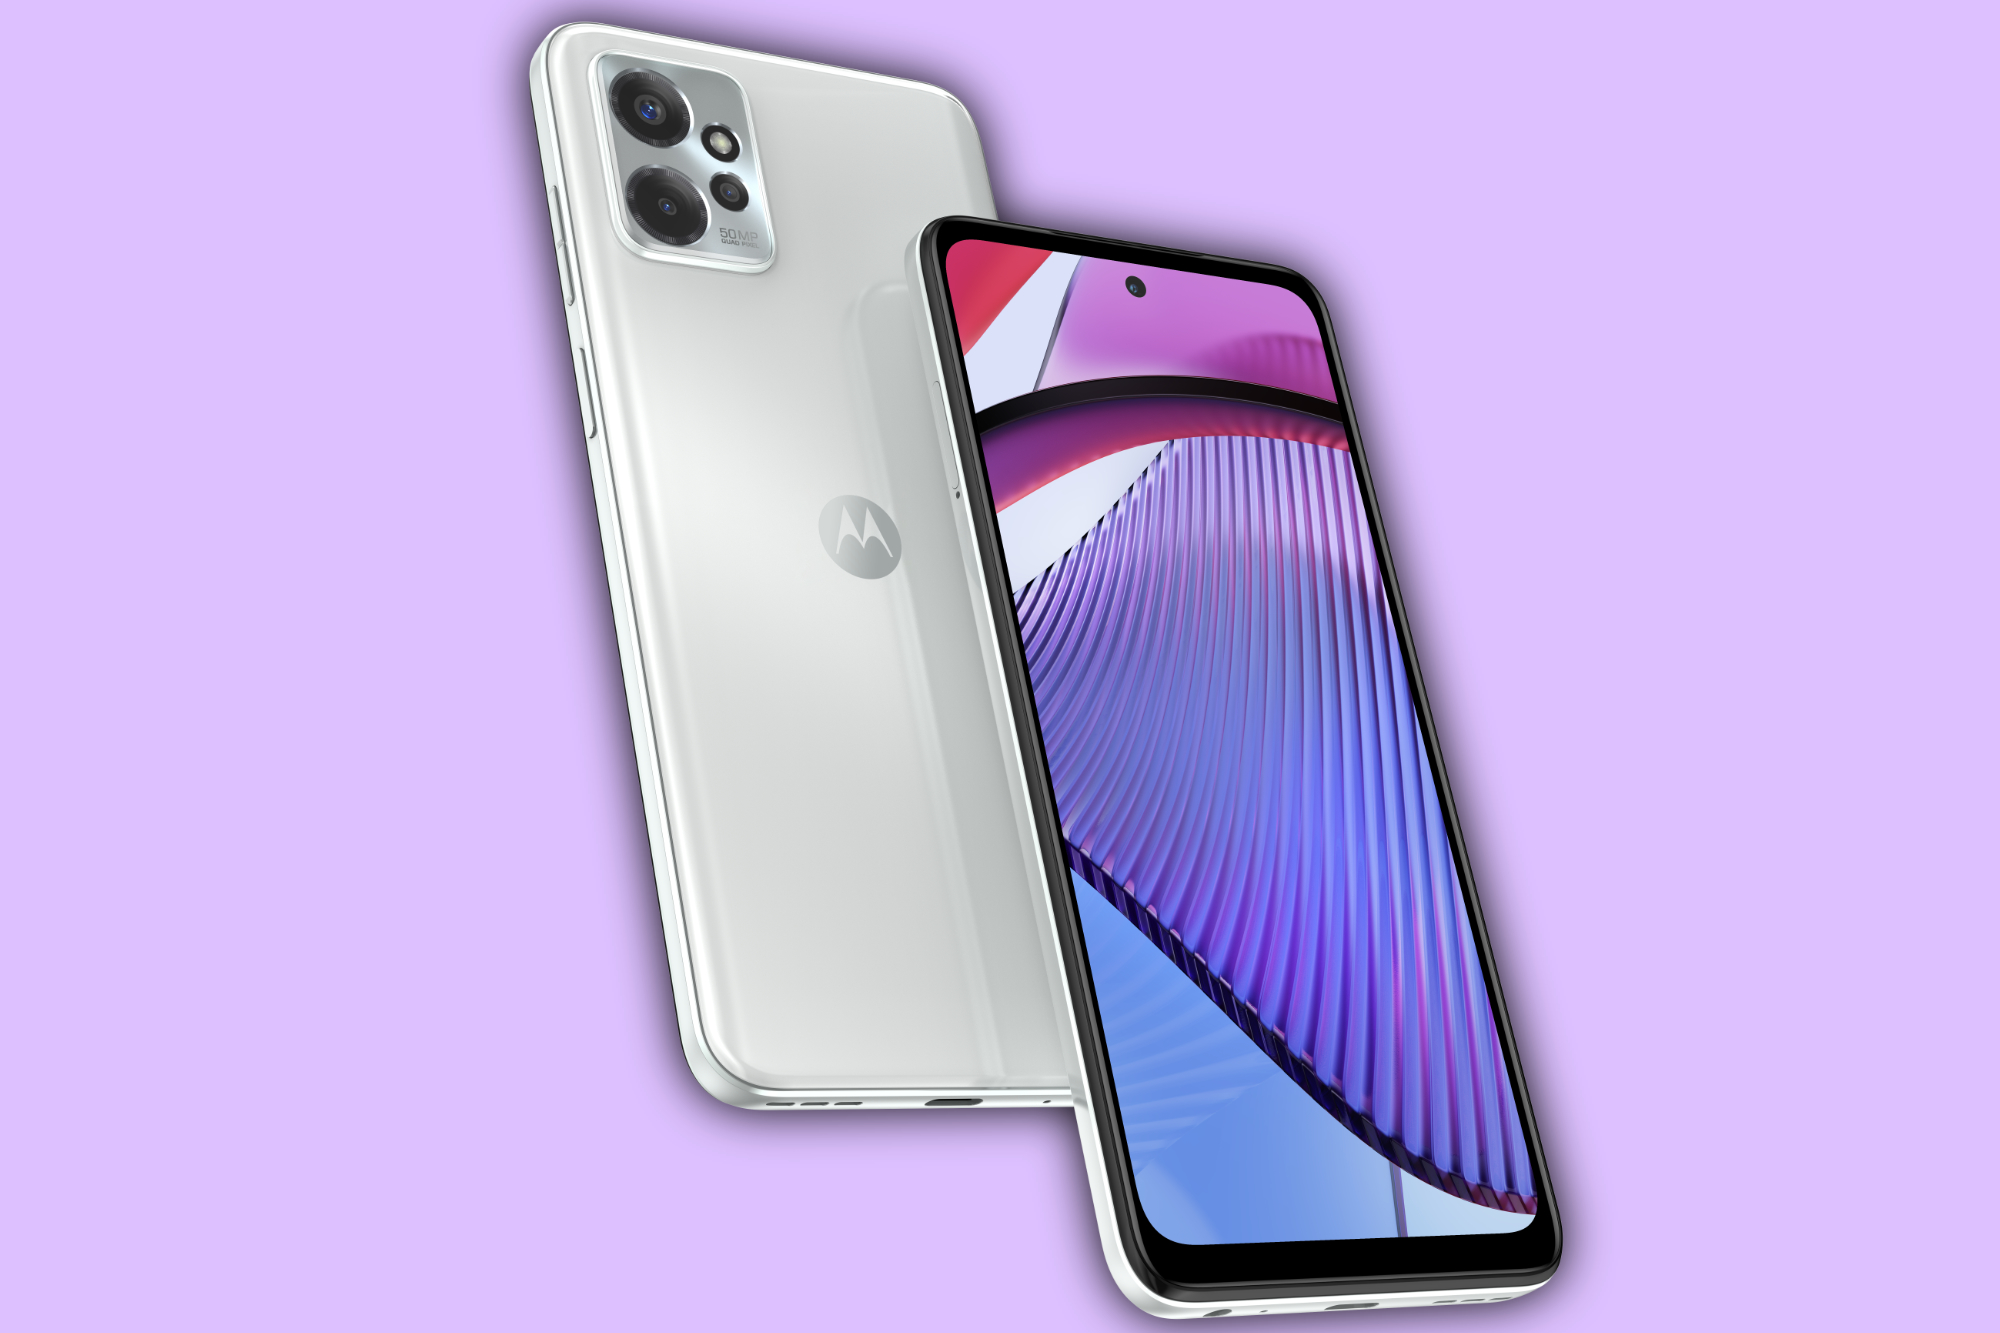 Render of the Motorola Moto G Power 5G in a white color against a light purple background.